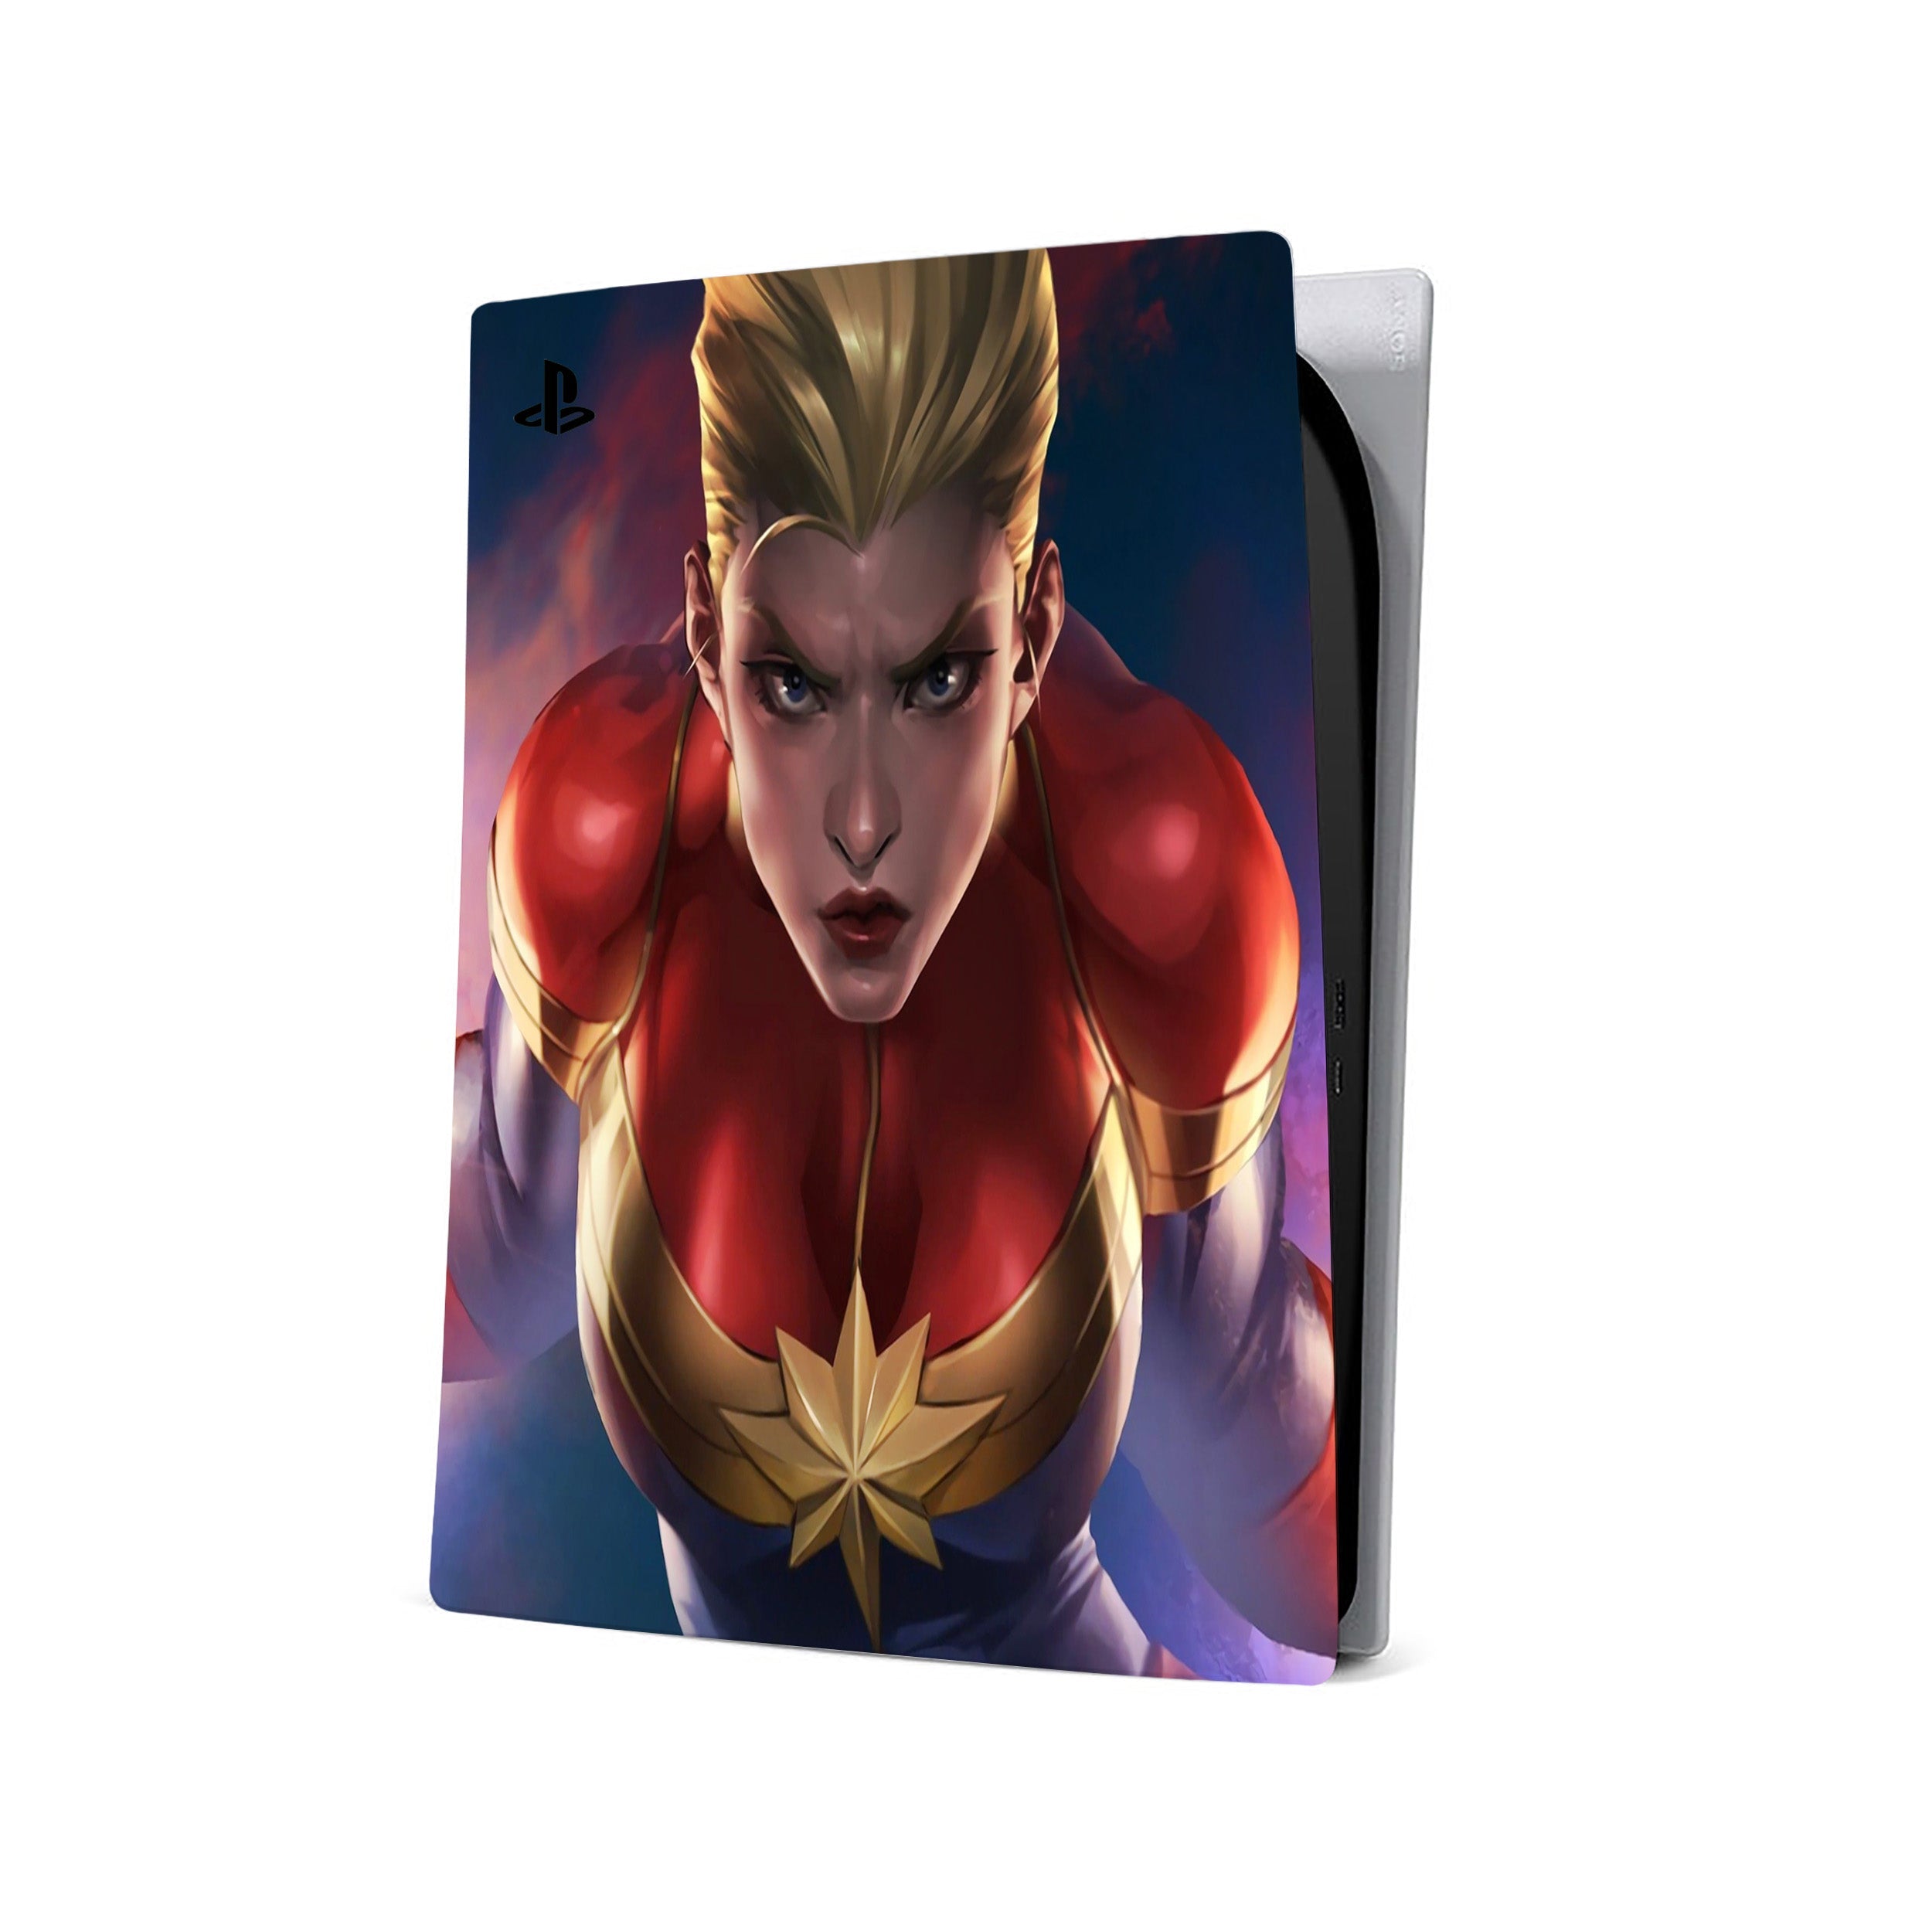 A video game skin featuring a Marvel Captain Marvel design for the PS5.